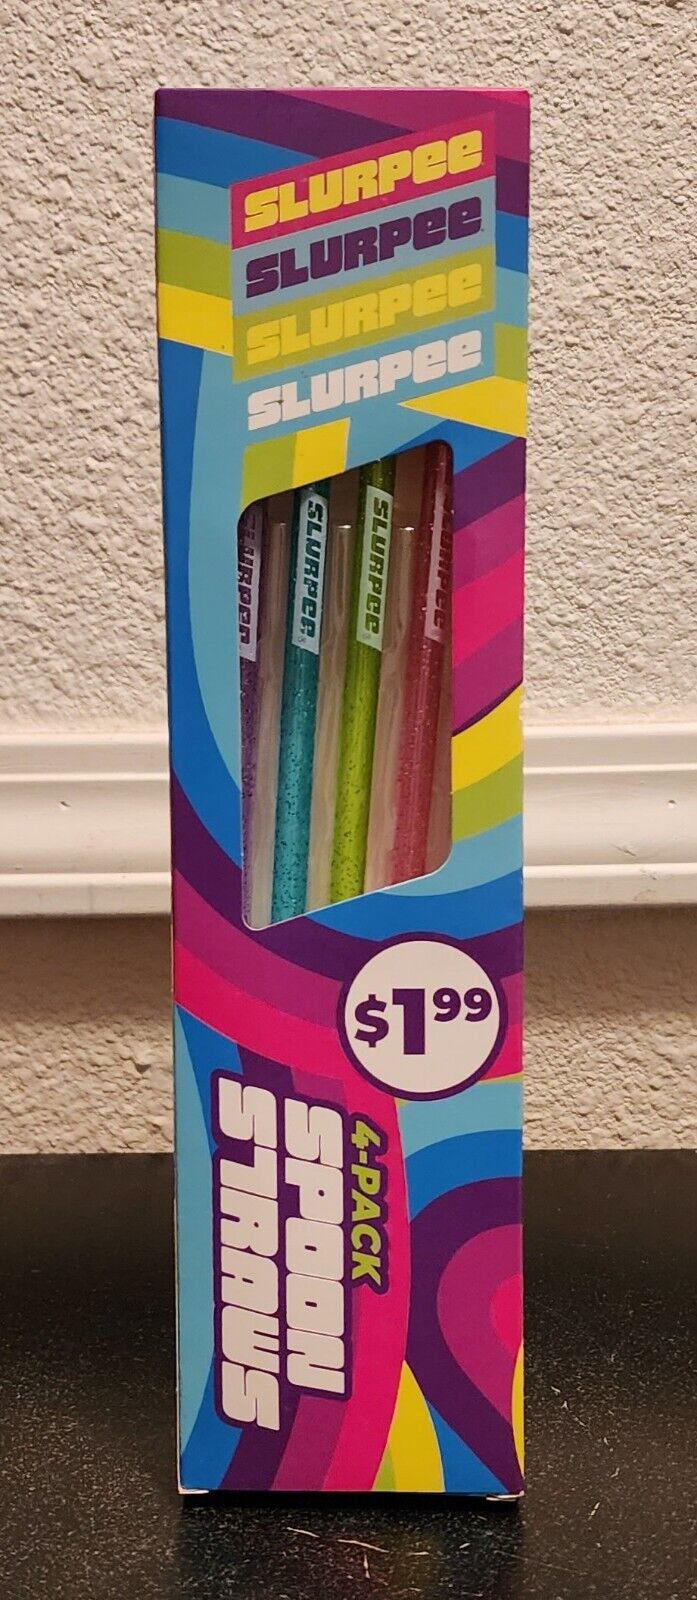 New 2022 7-Eleven Limited Edition Slurpee Spoon Straws 4 pack